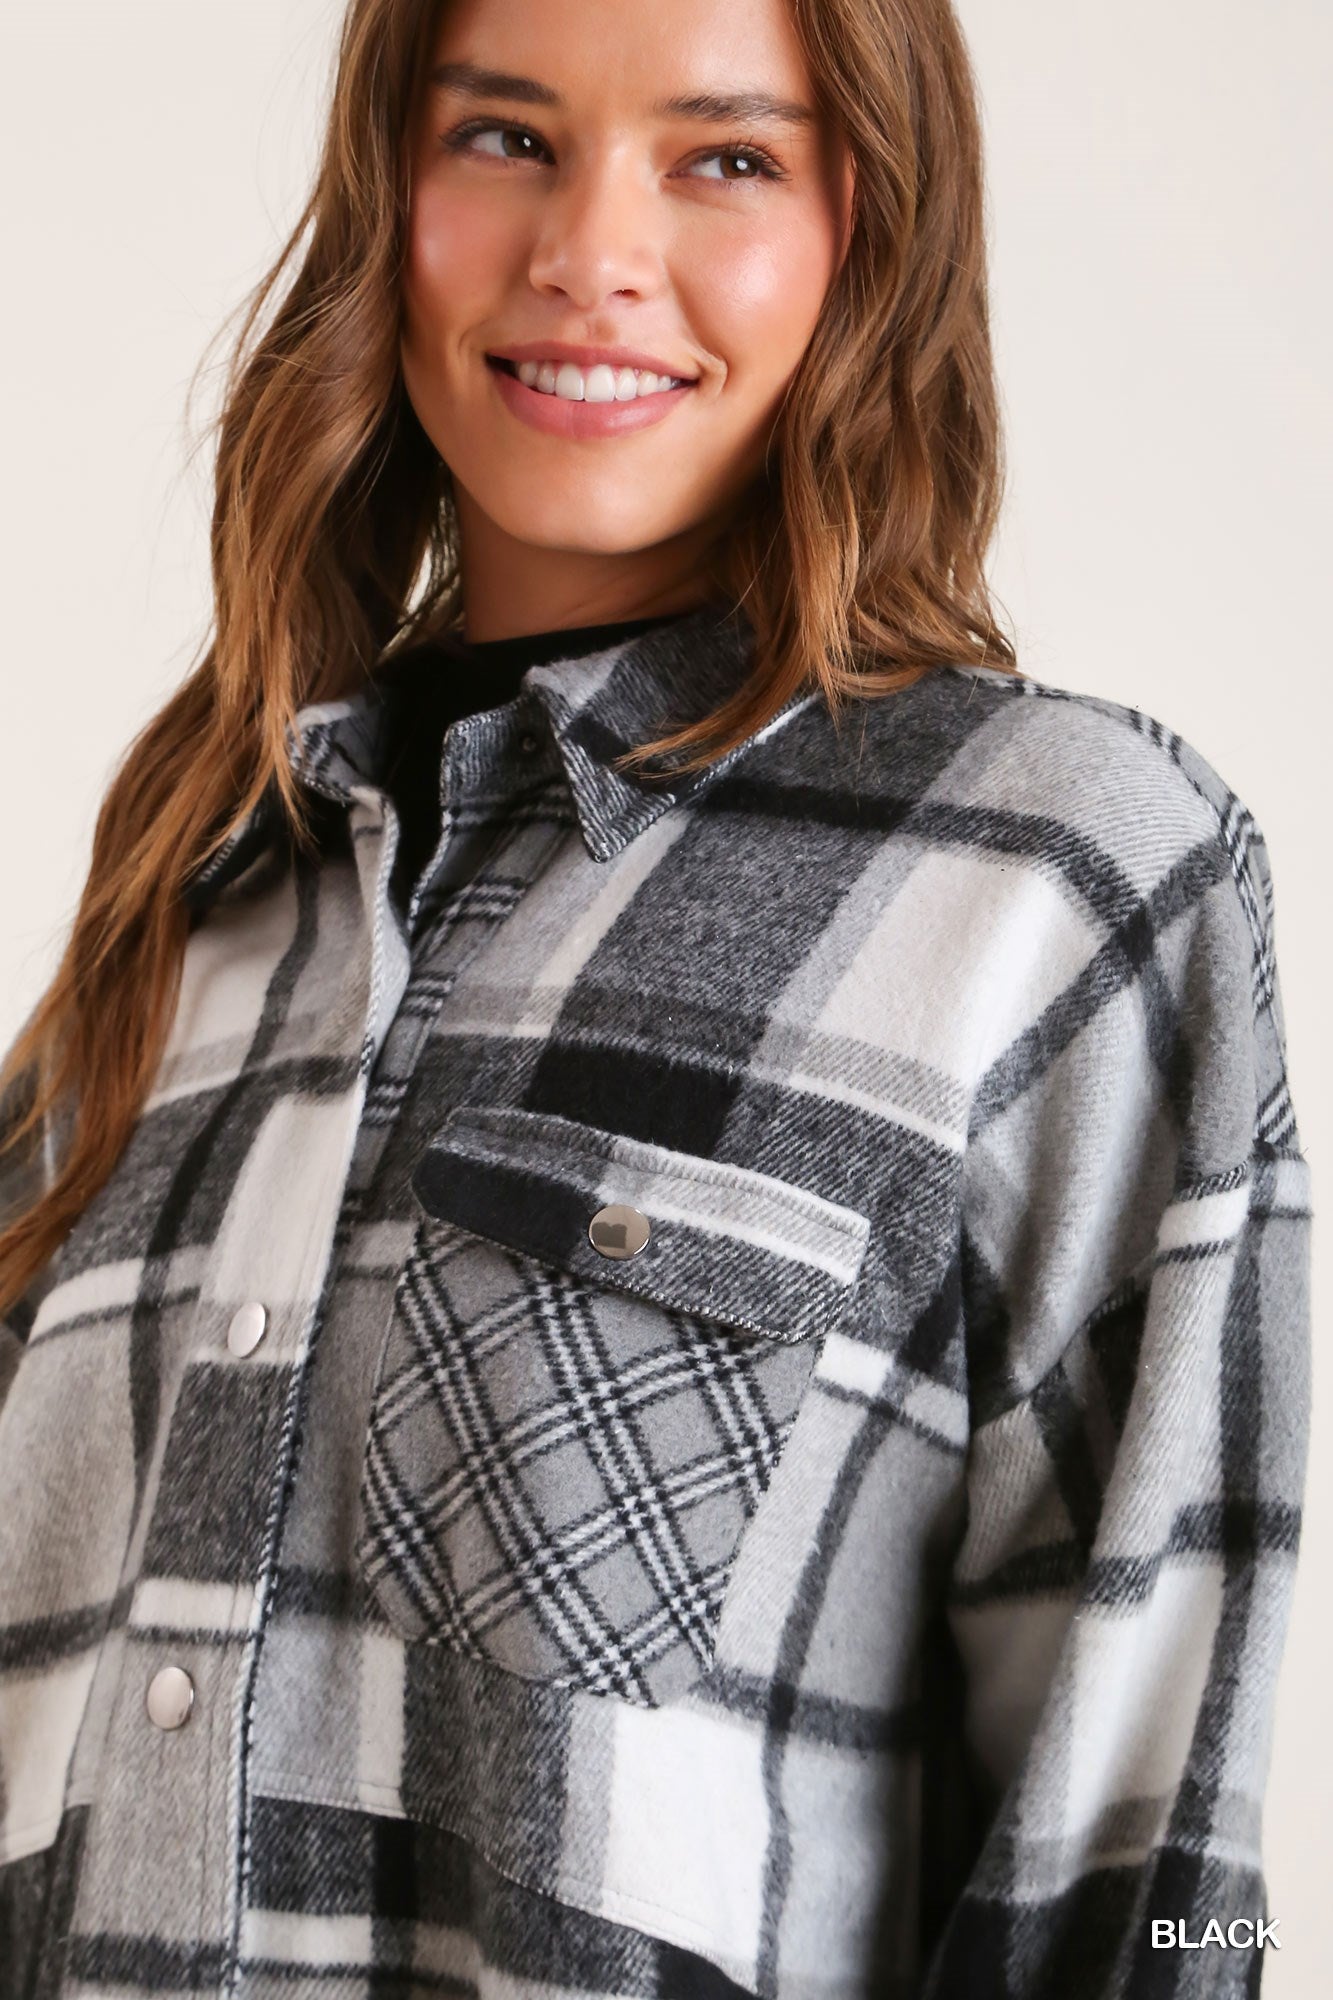 Umgee Contrast Plaid Chest Pockets Button Down Collared Jacket - Roulhac Fashion Boutique